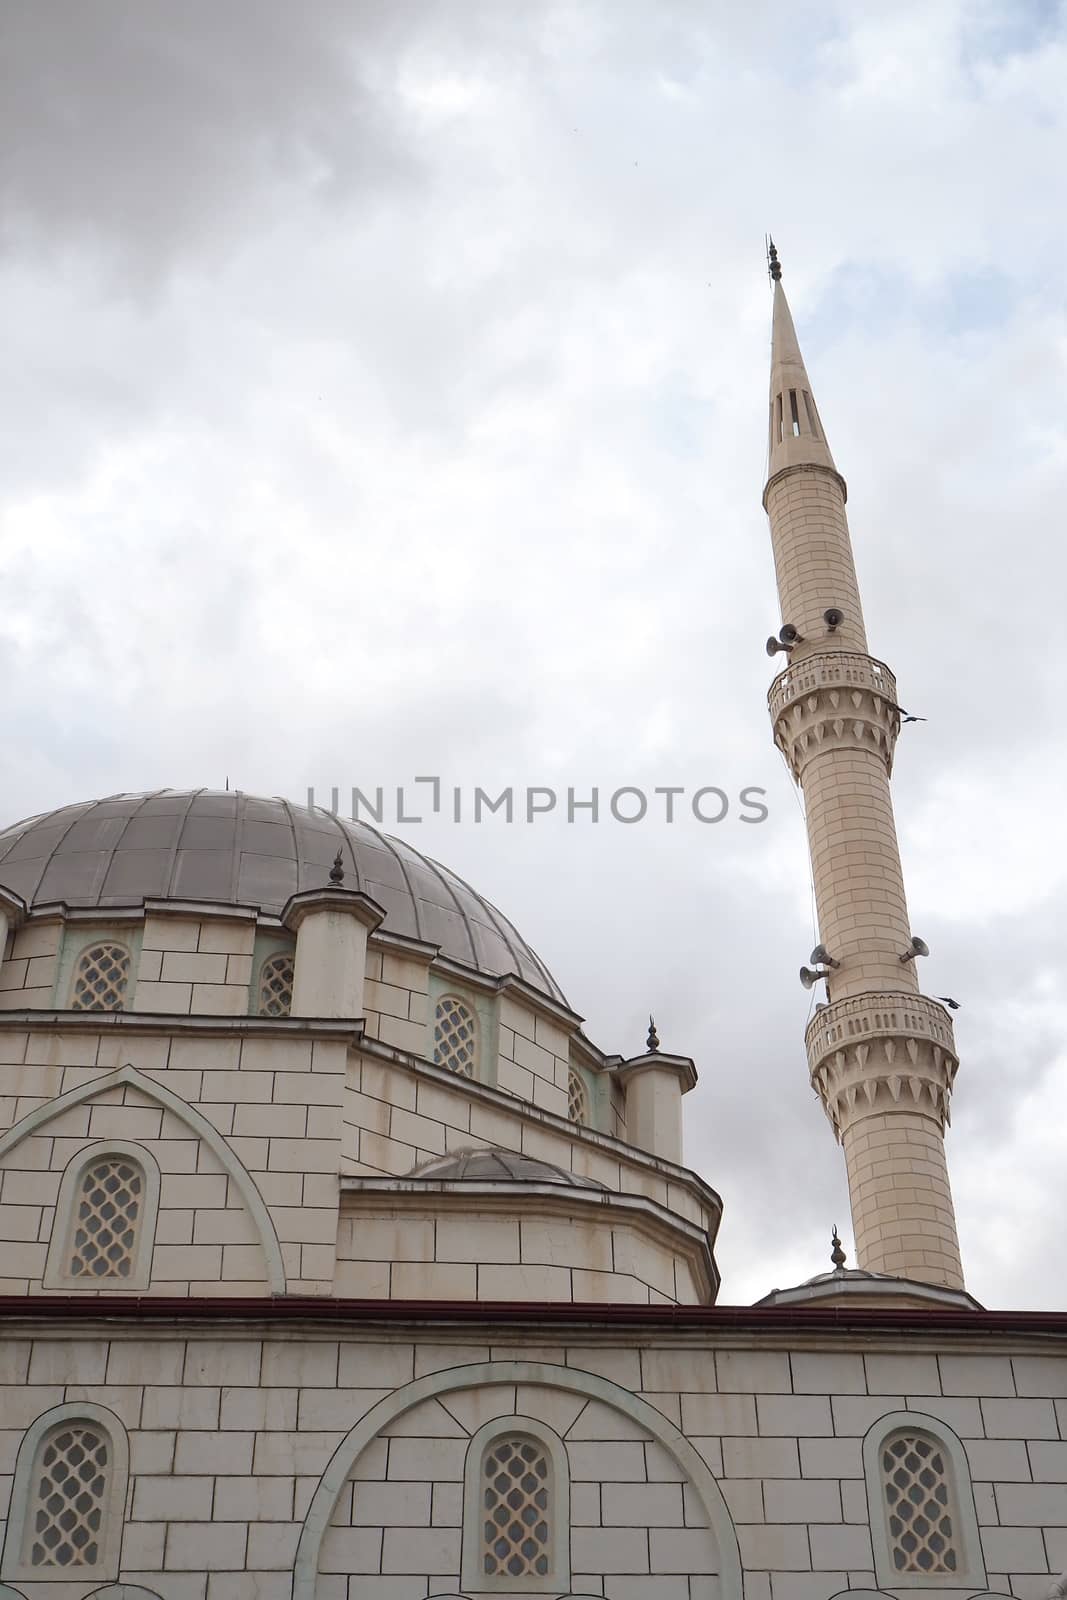 turkey in the neighborhood of a neighborhood mosque, minaret and long-domed mosque,